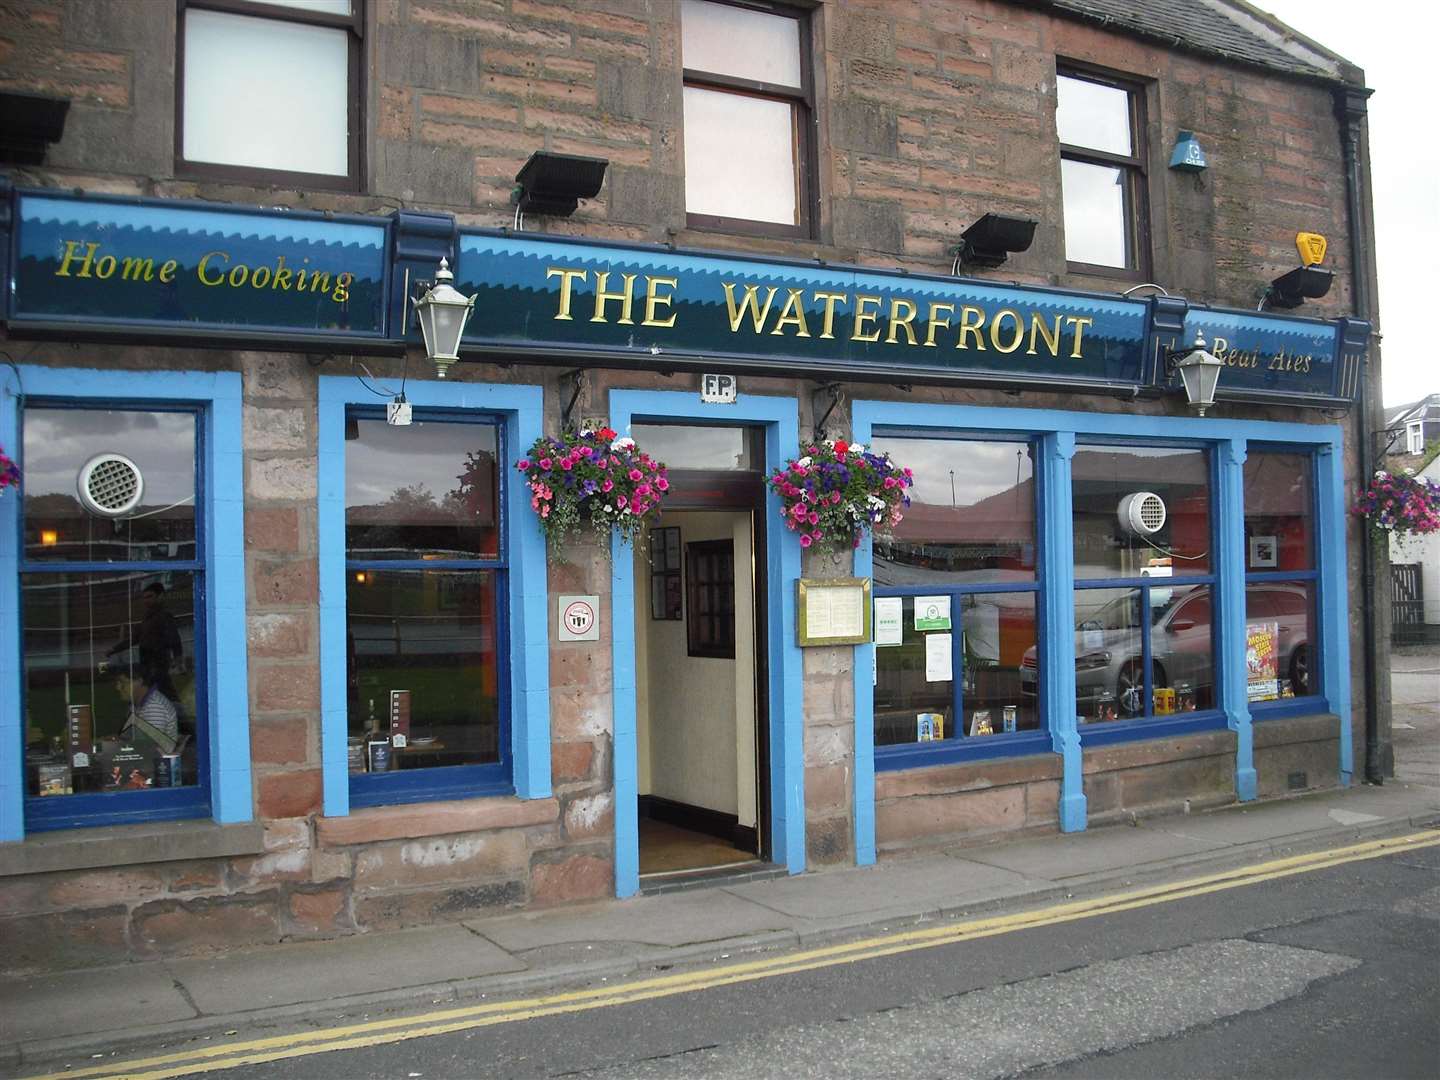 The Waterfront pub has been recognised for the quality of its food.